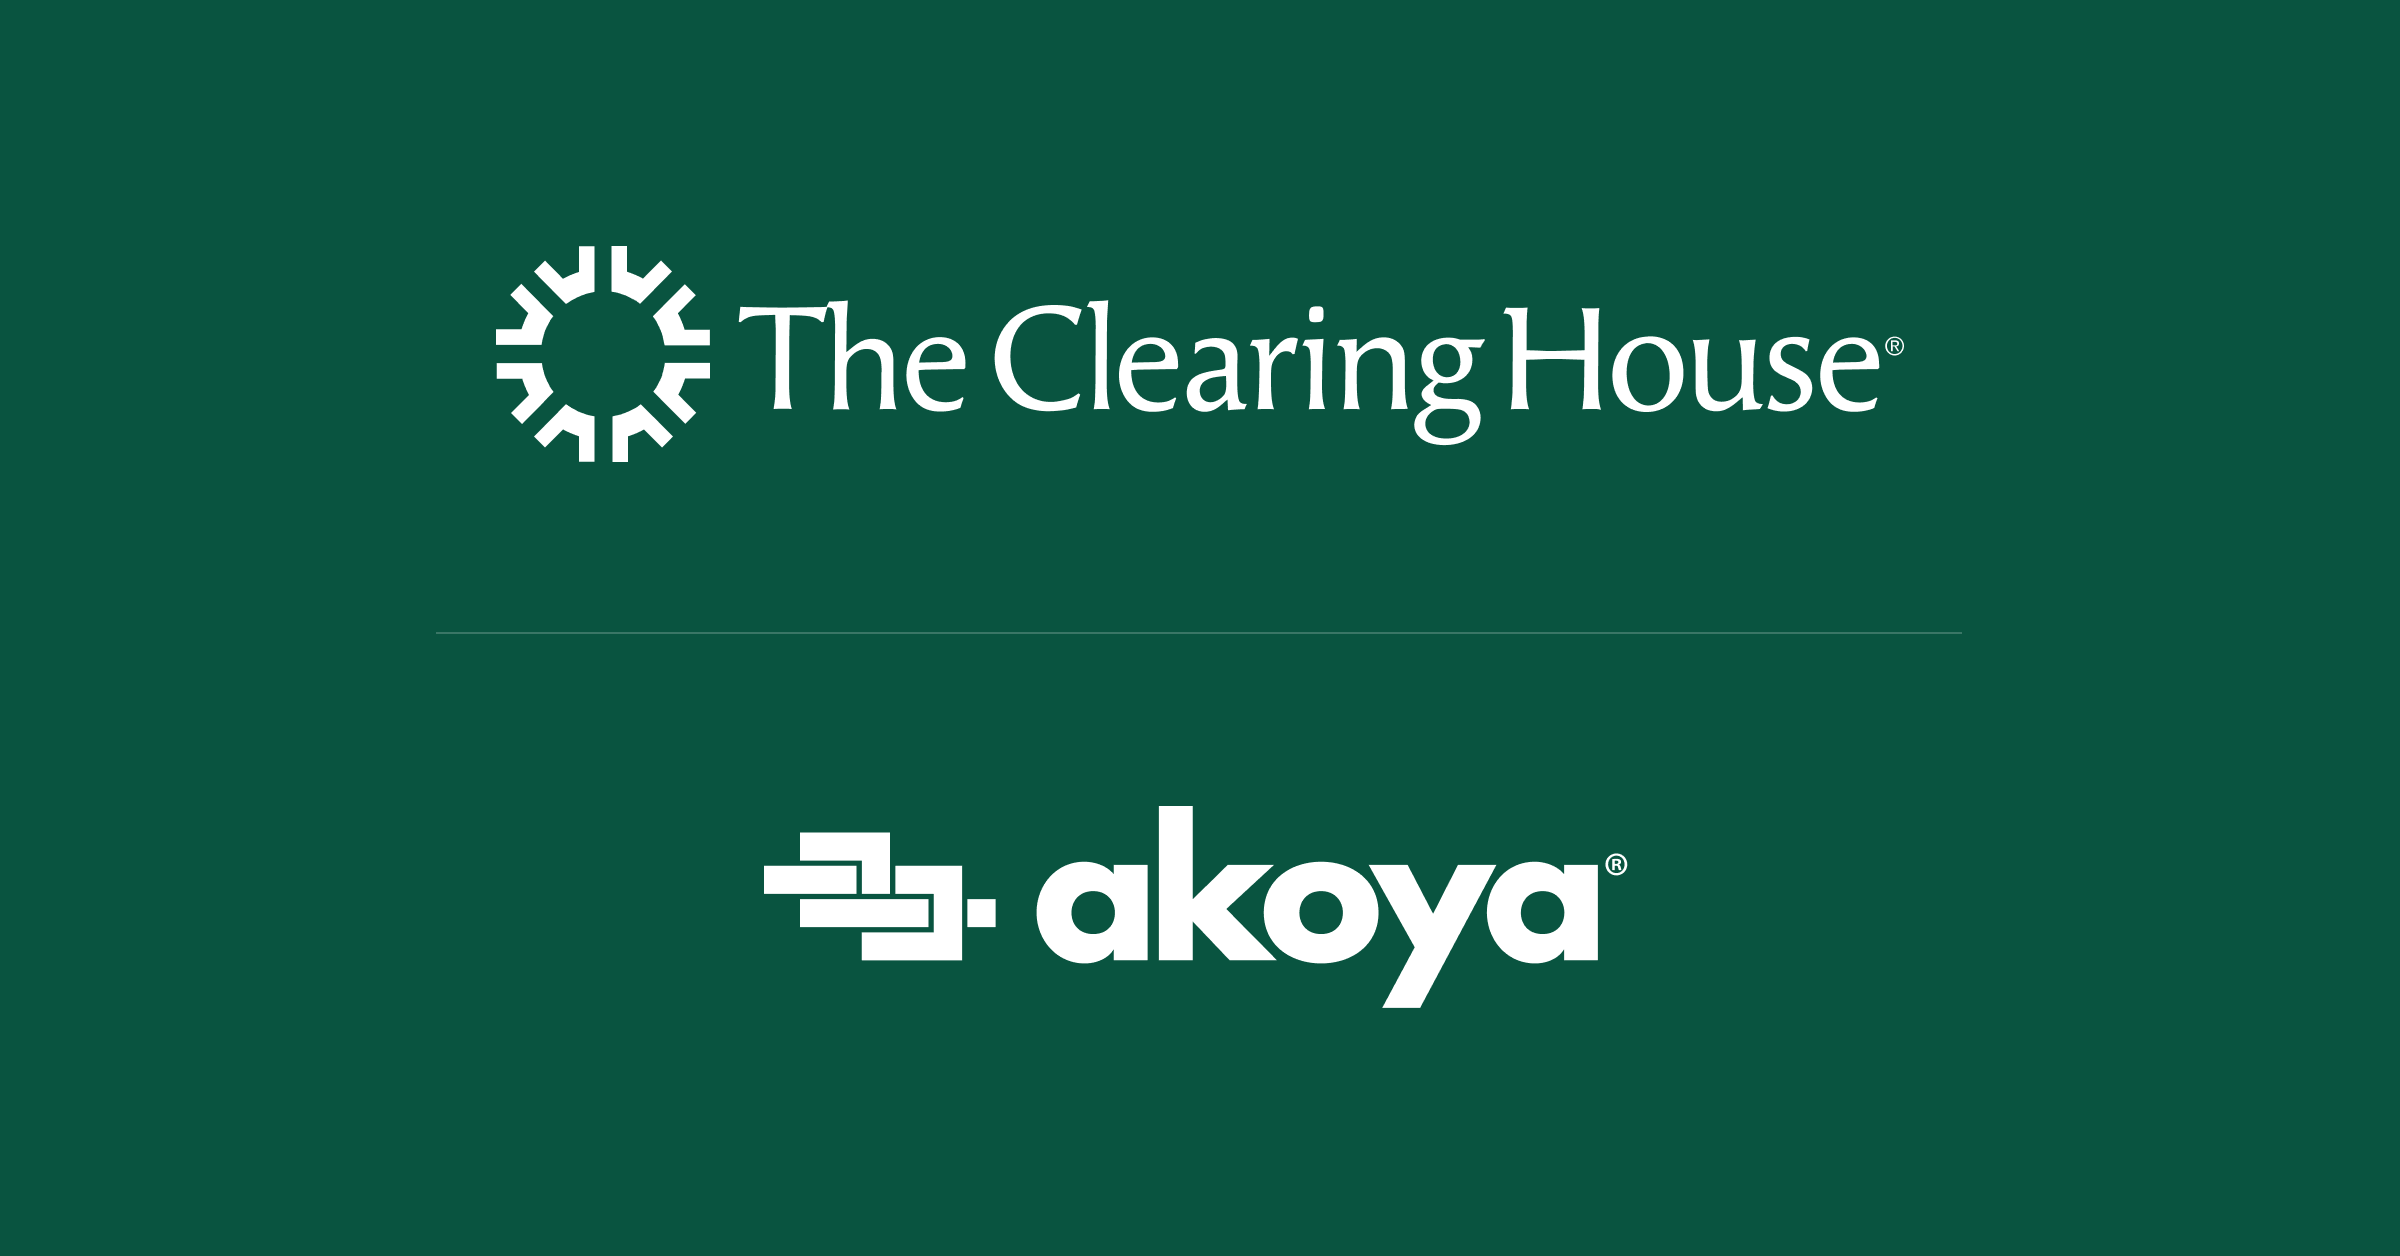 Akoya is the first third-party service provider for tokenized payments